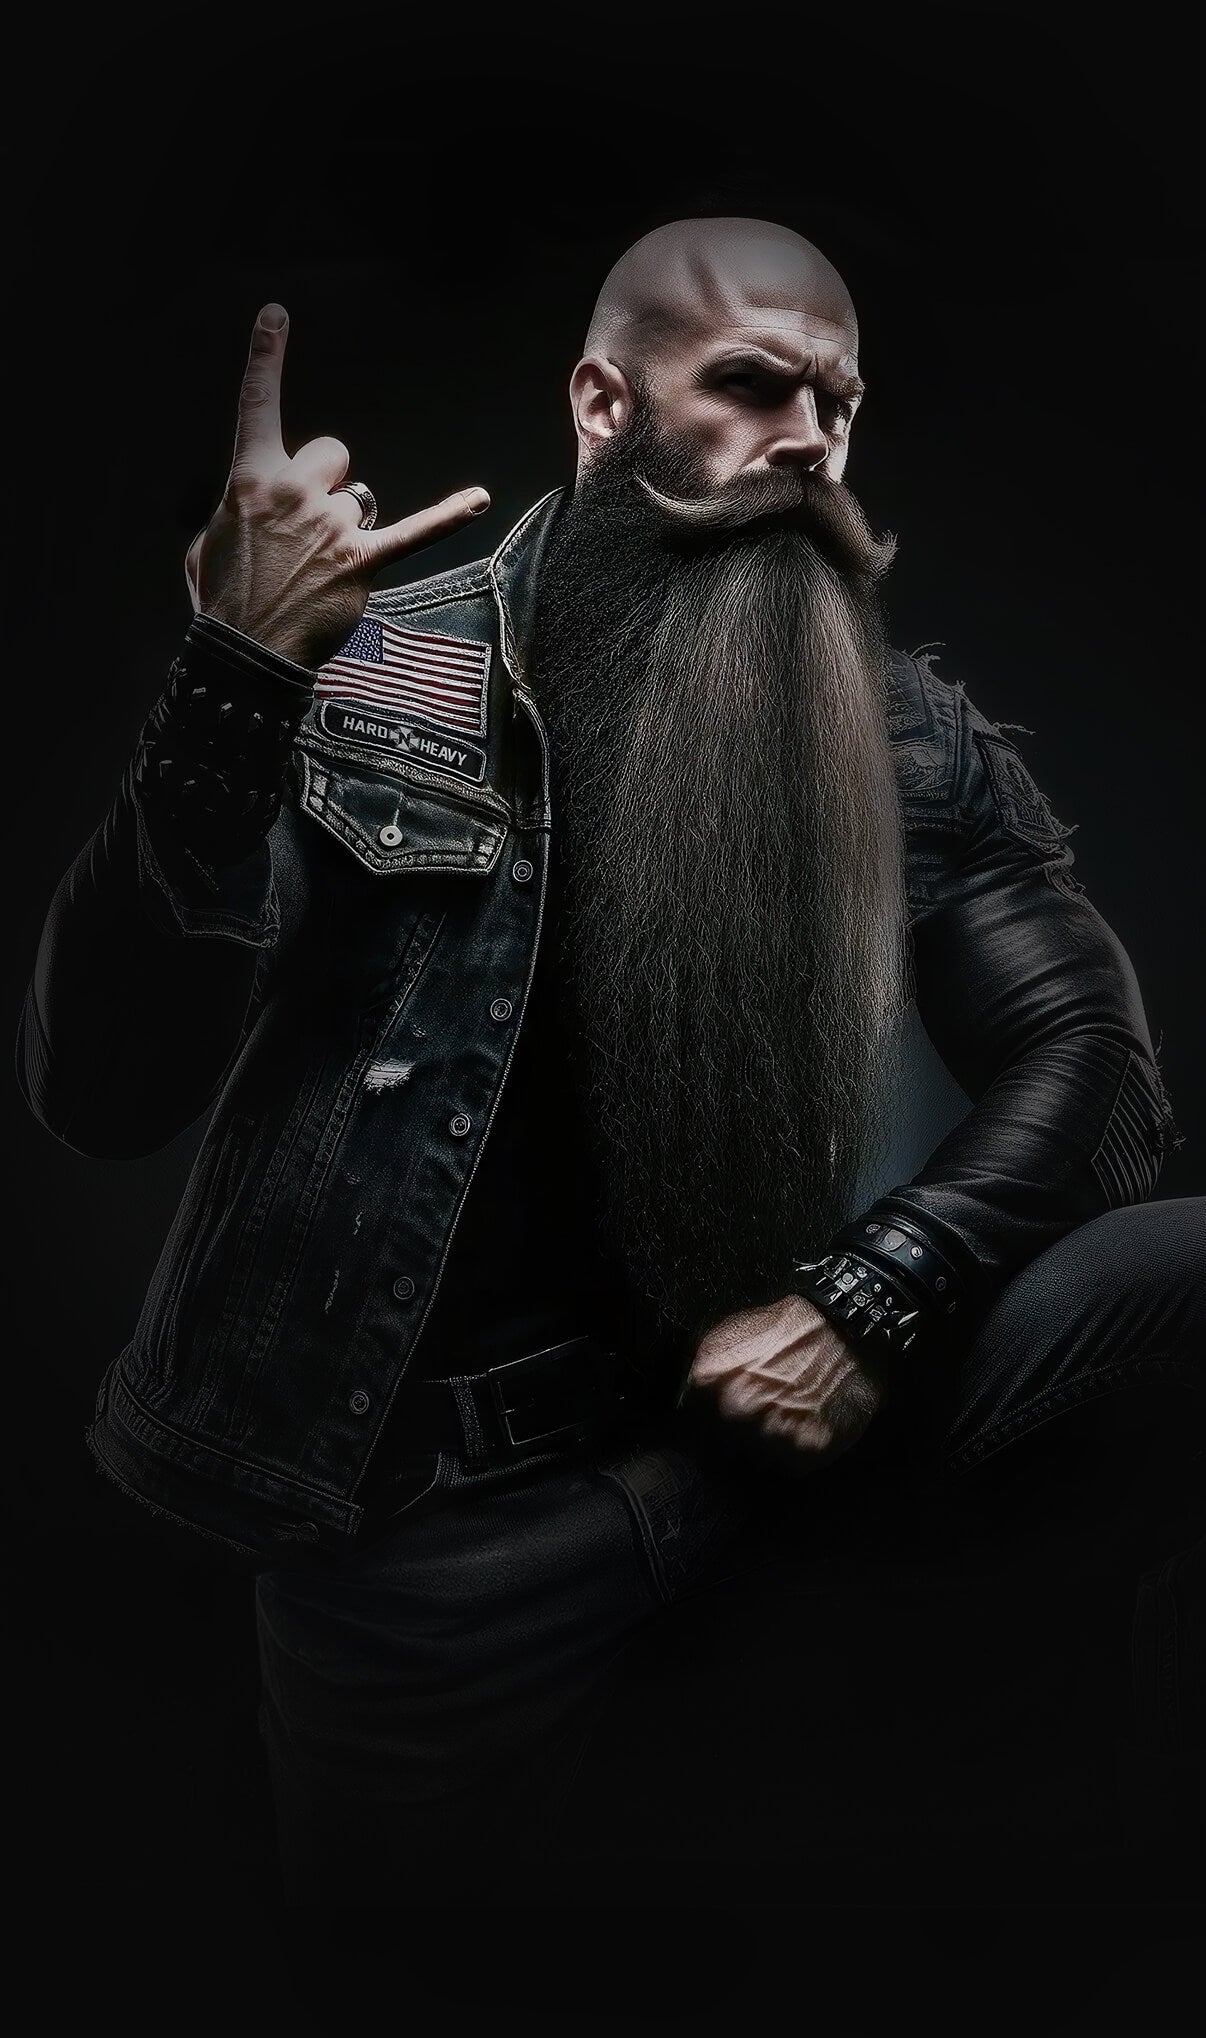 A man with a long, well-groomed beard and bald head is giving the rock and roll sign with his right hand. He wears a black leather jacket and denim vest with a patch of the American flag on the right side.